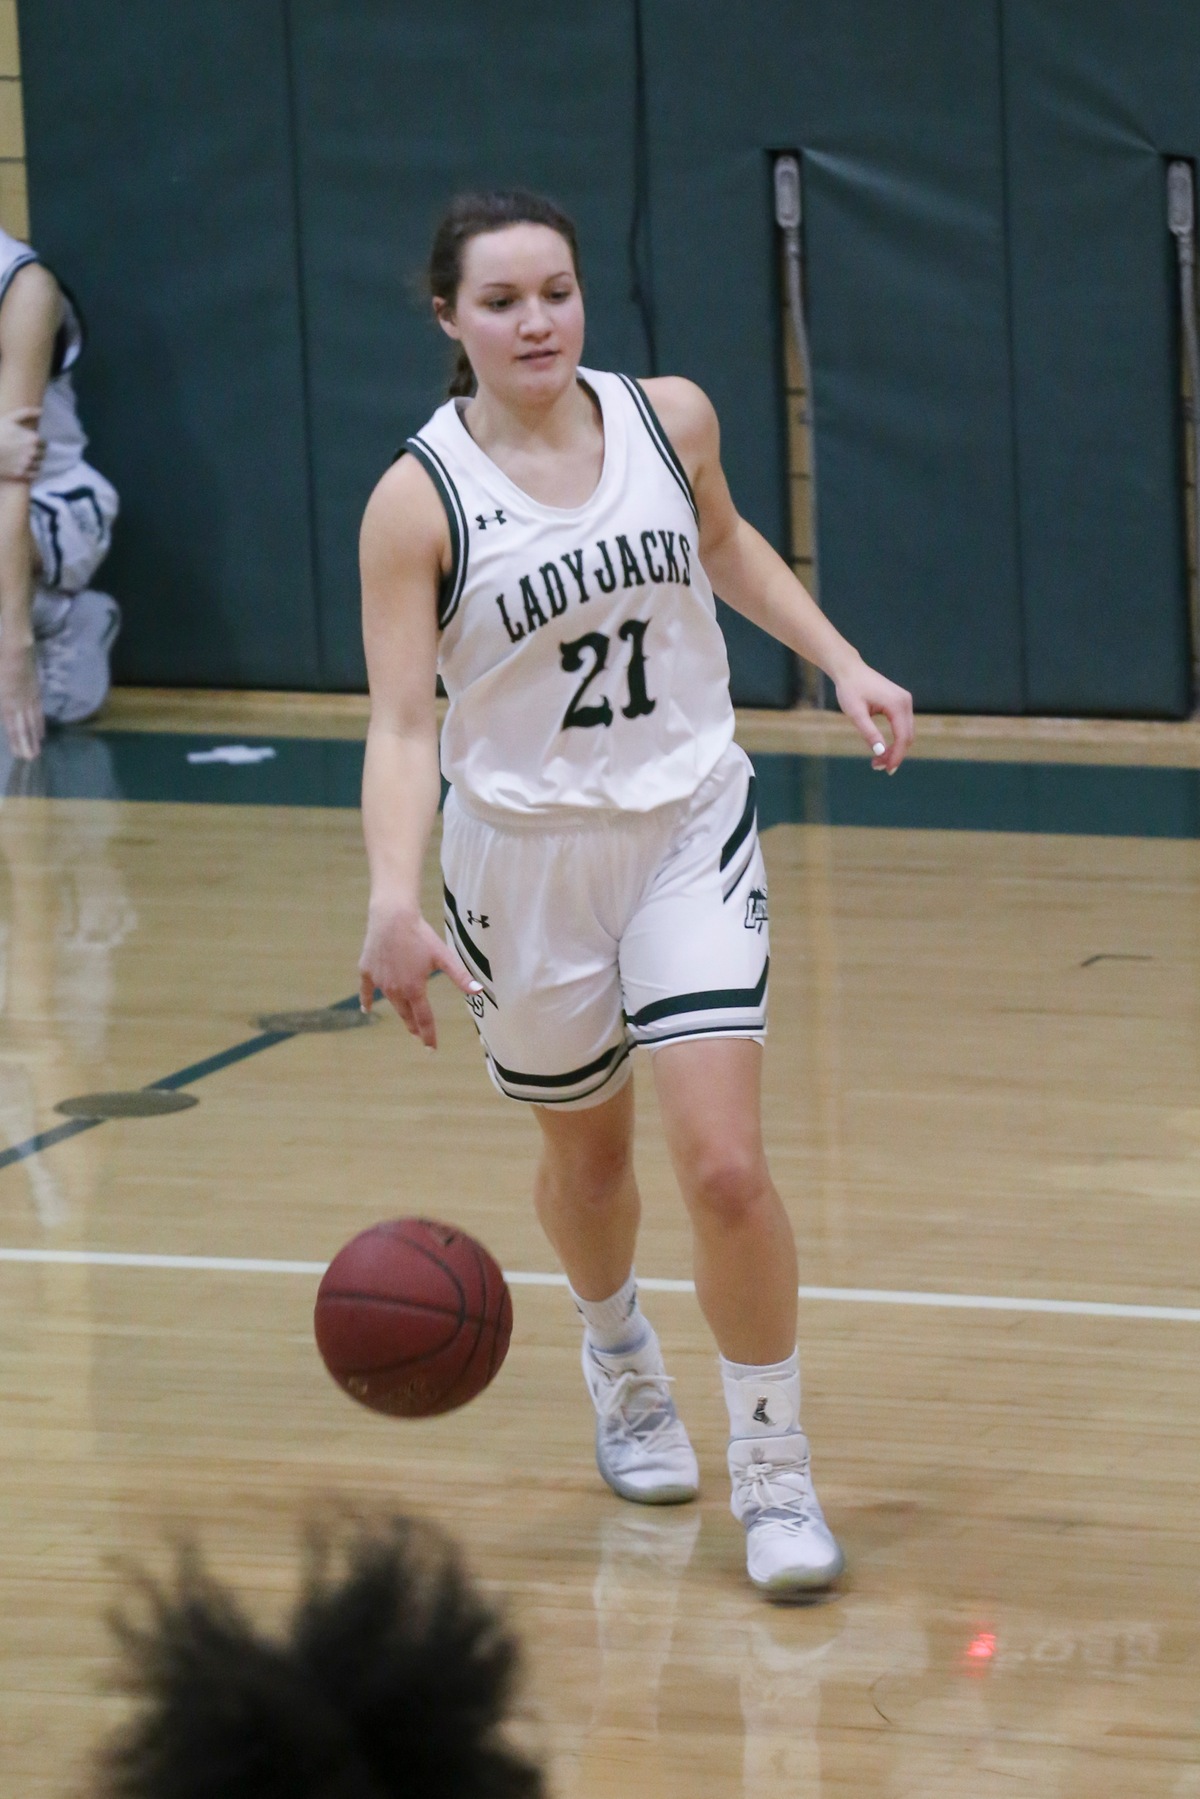 Madison Uhlenkamp had a season high 8 steals in DCB's 69-68 loss at home to Williston State College last night.